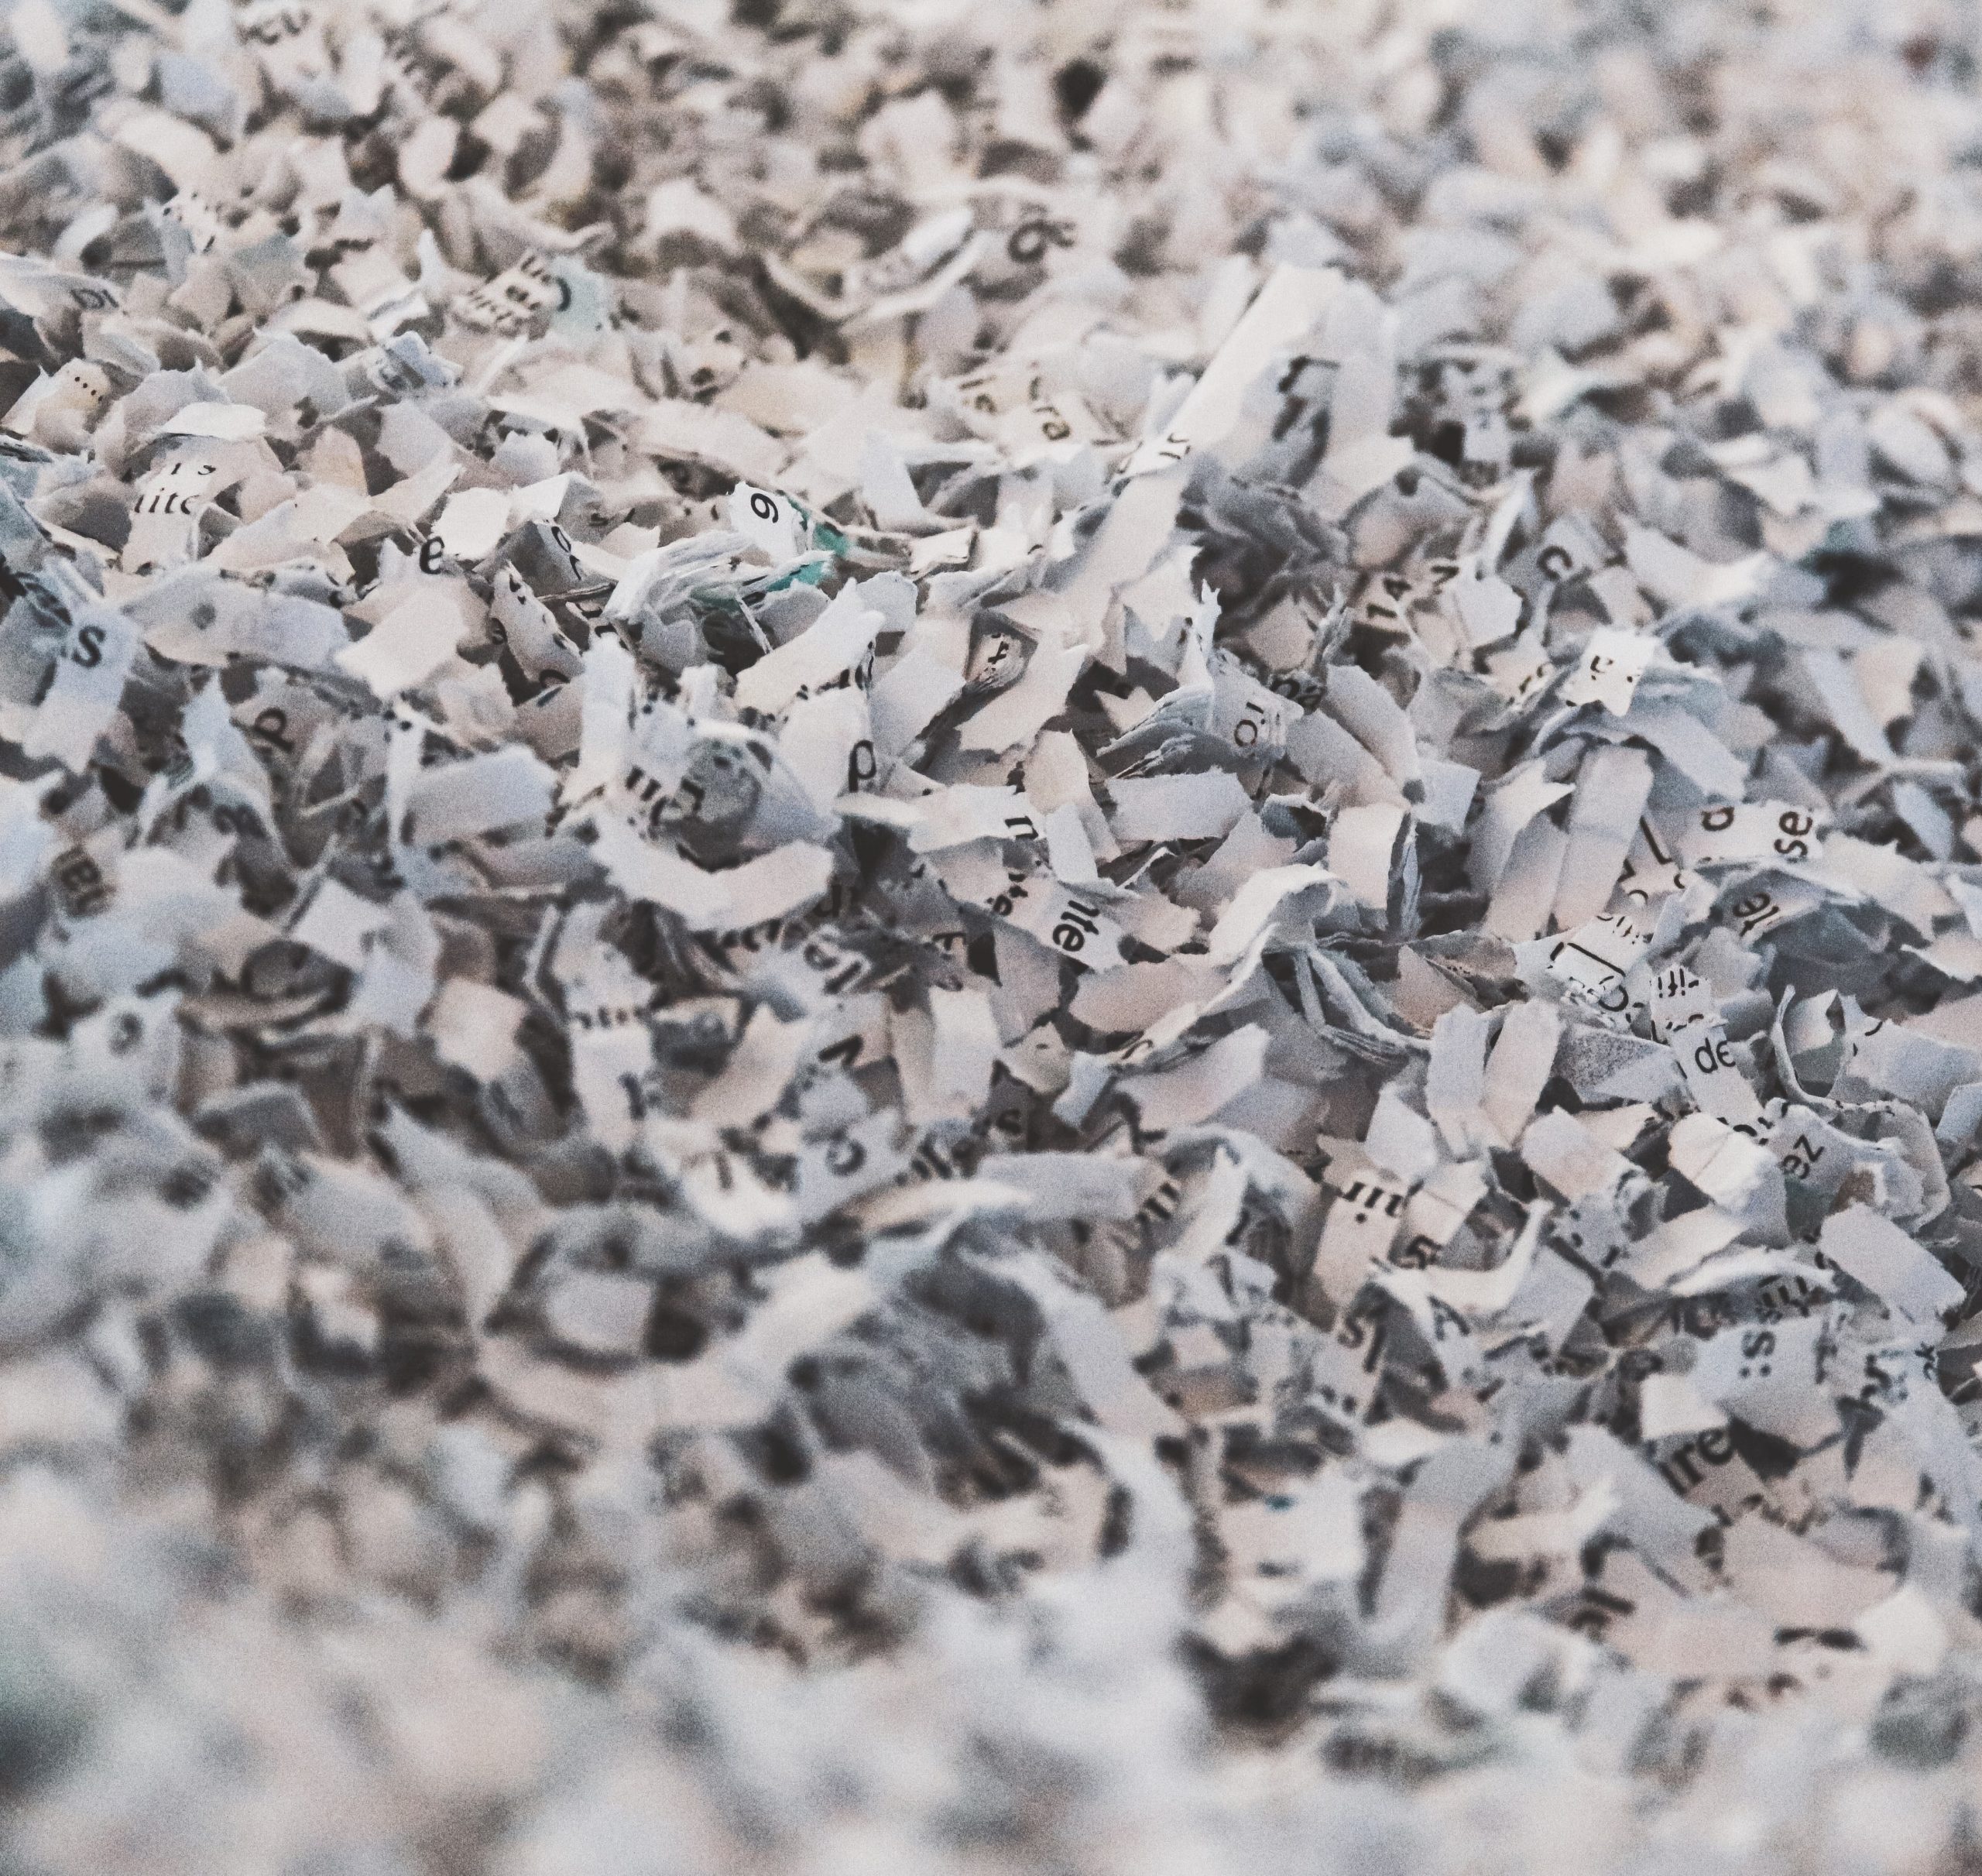 A macro photo of shredded document papers